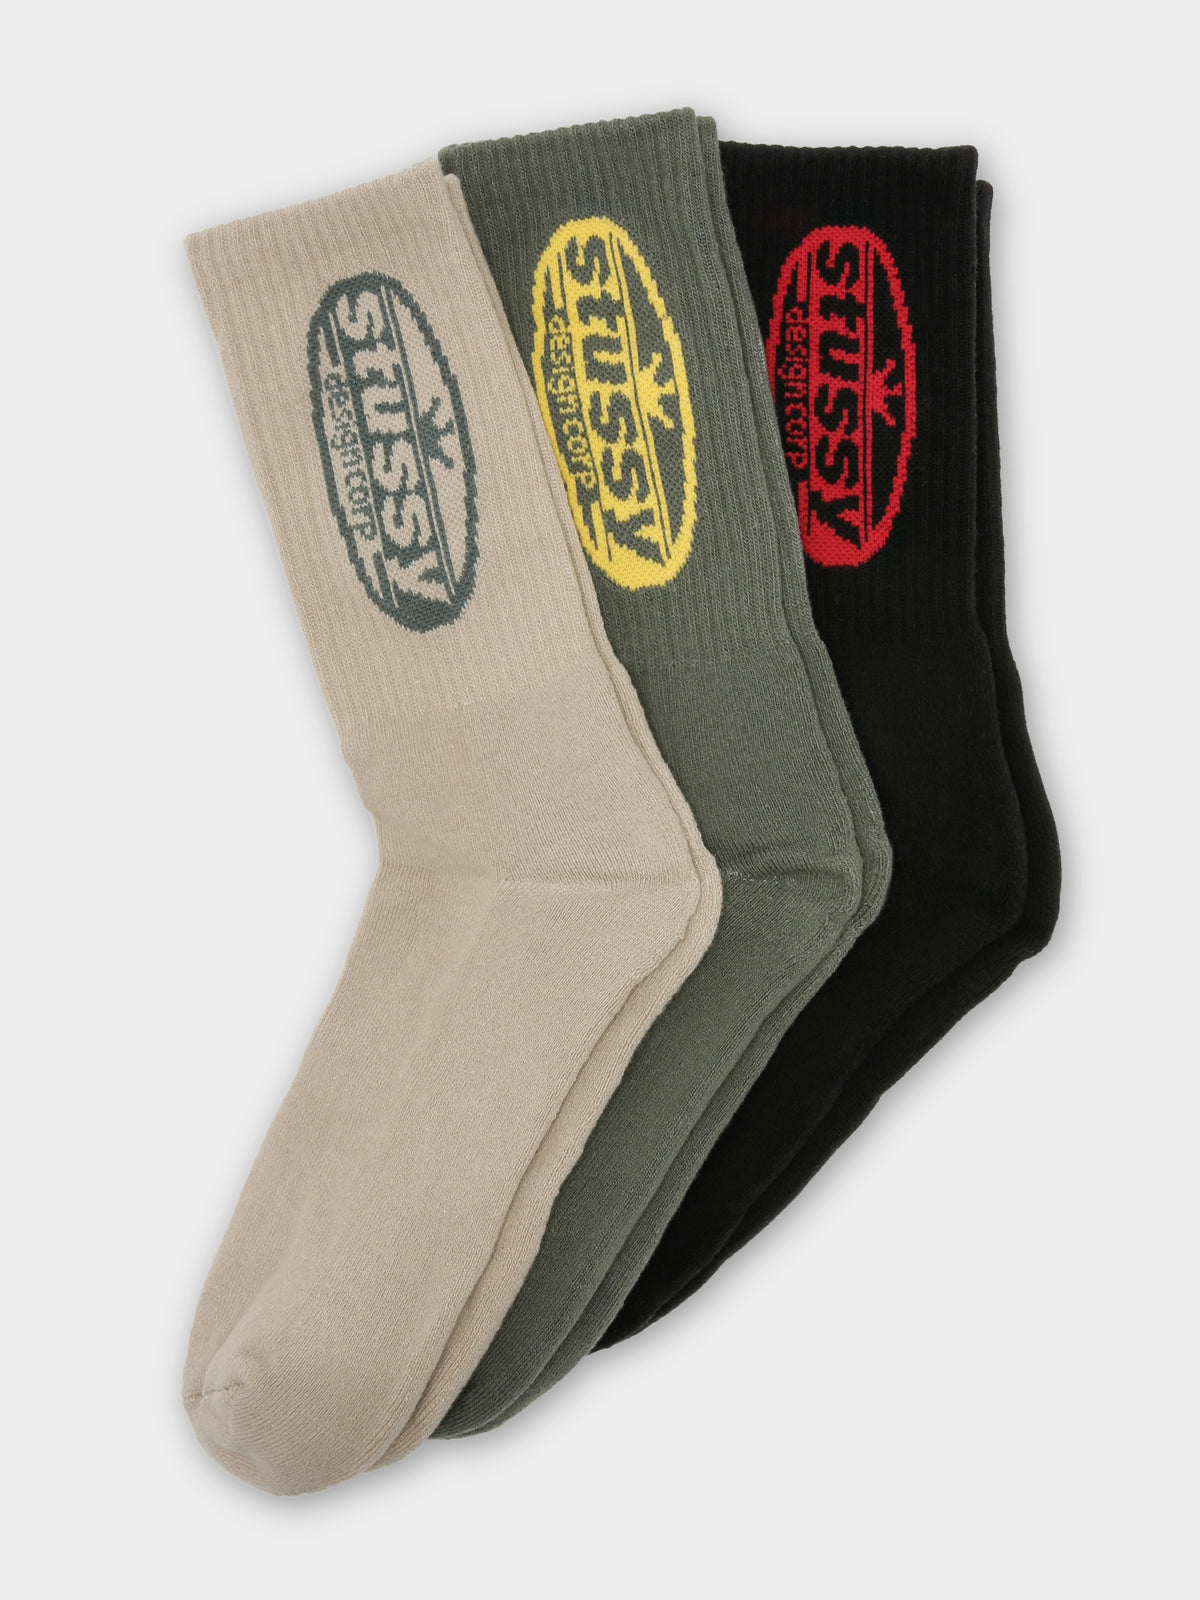 3 Pairs of Oval Corp Socks in Black, Green &amp; Beige